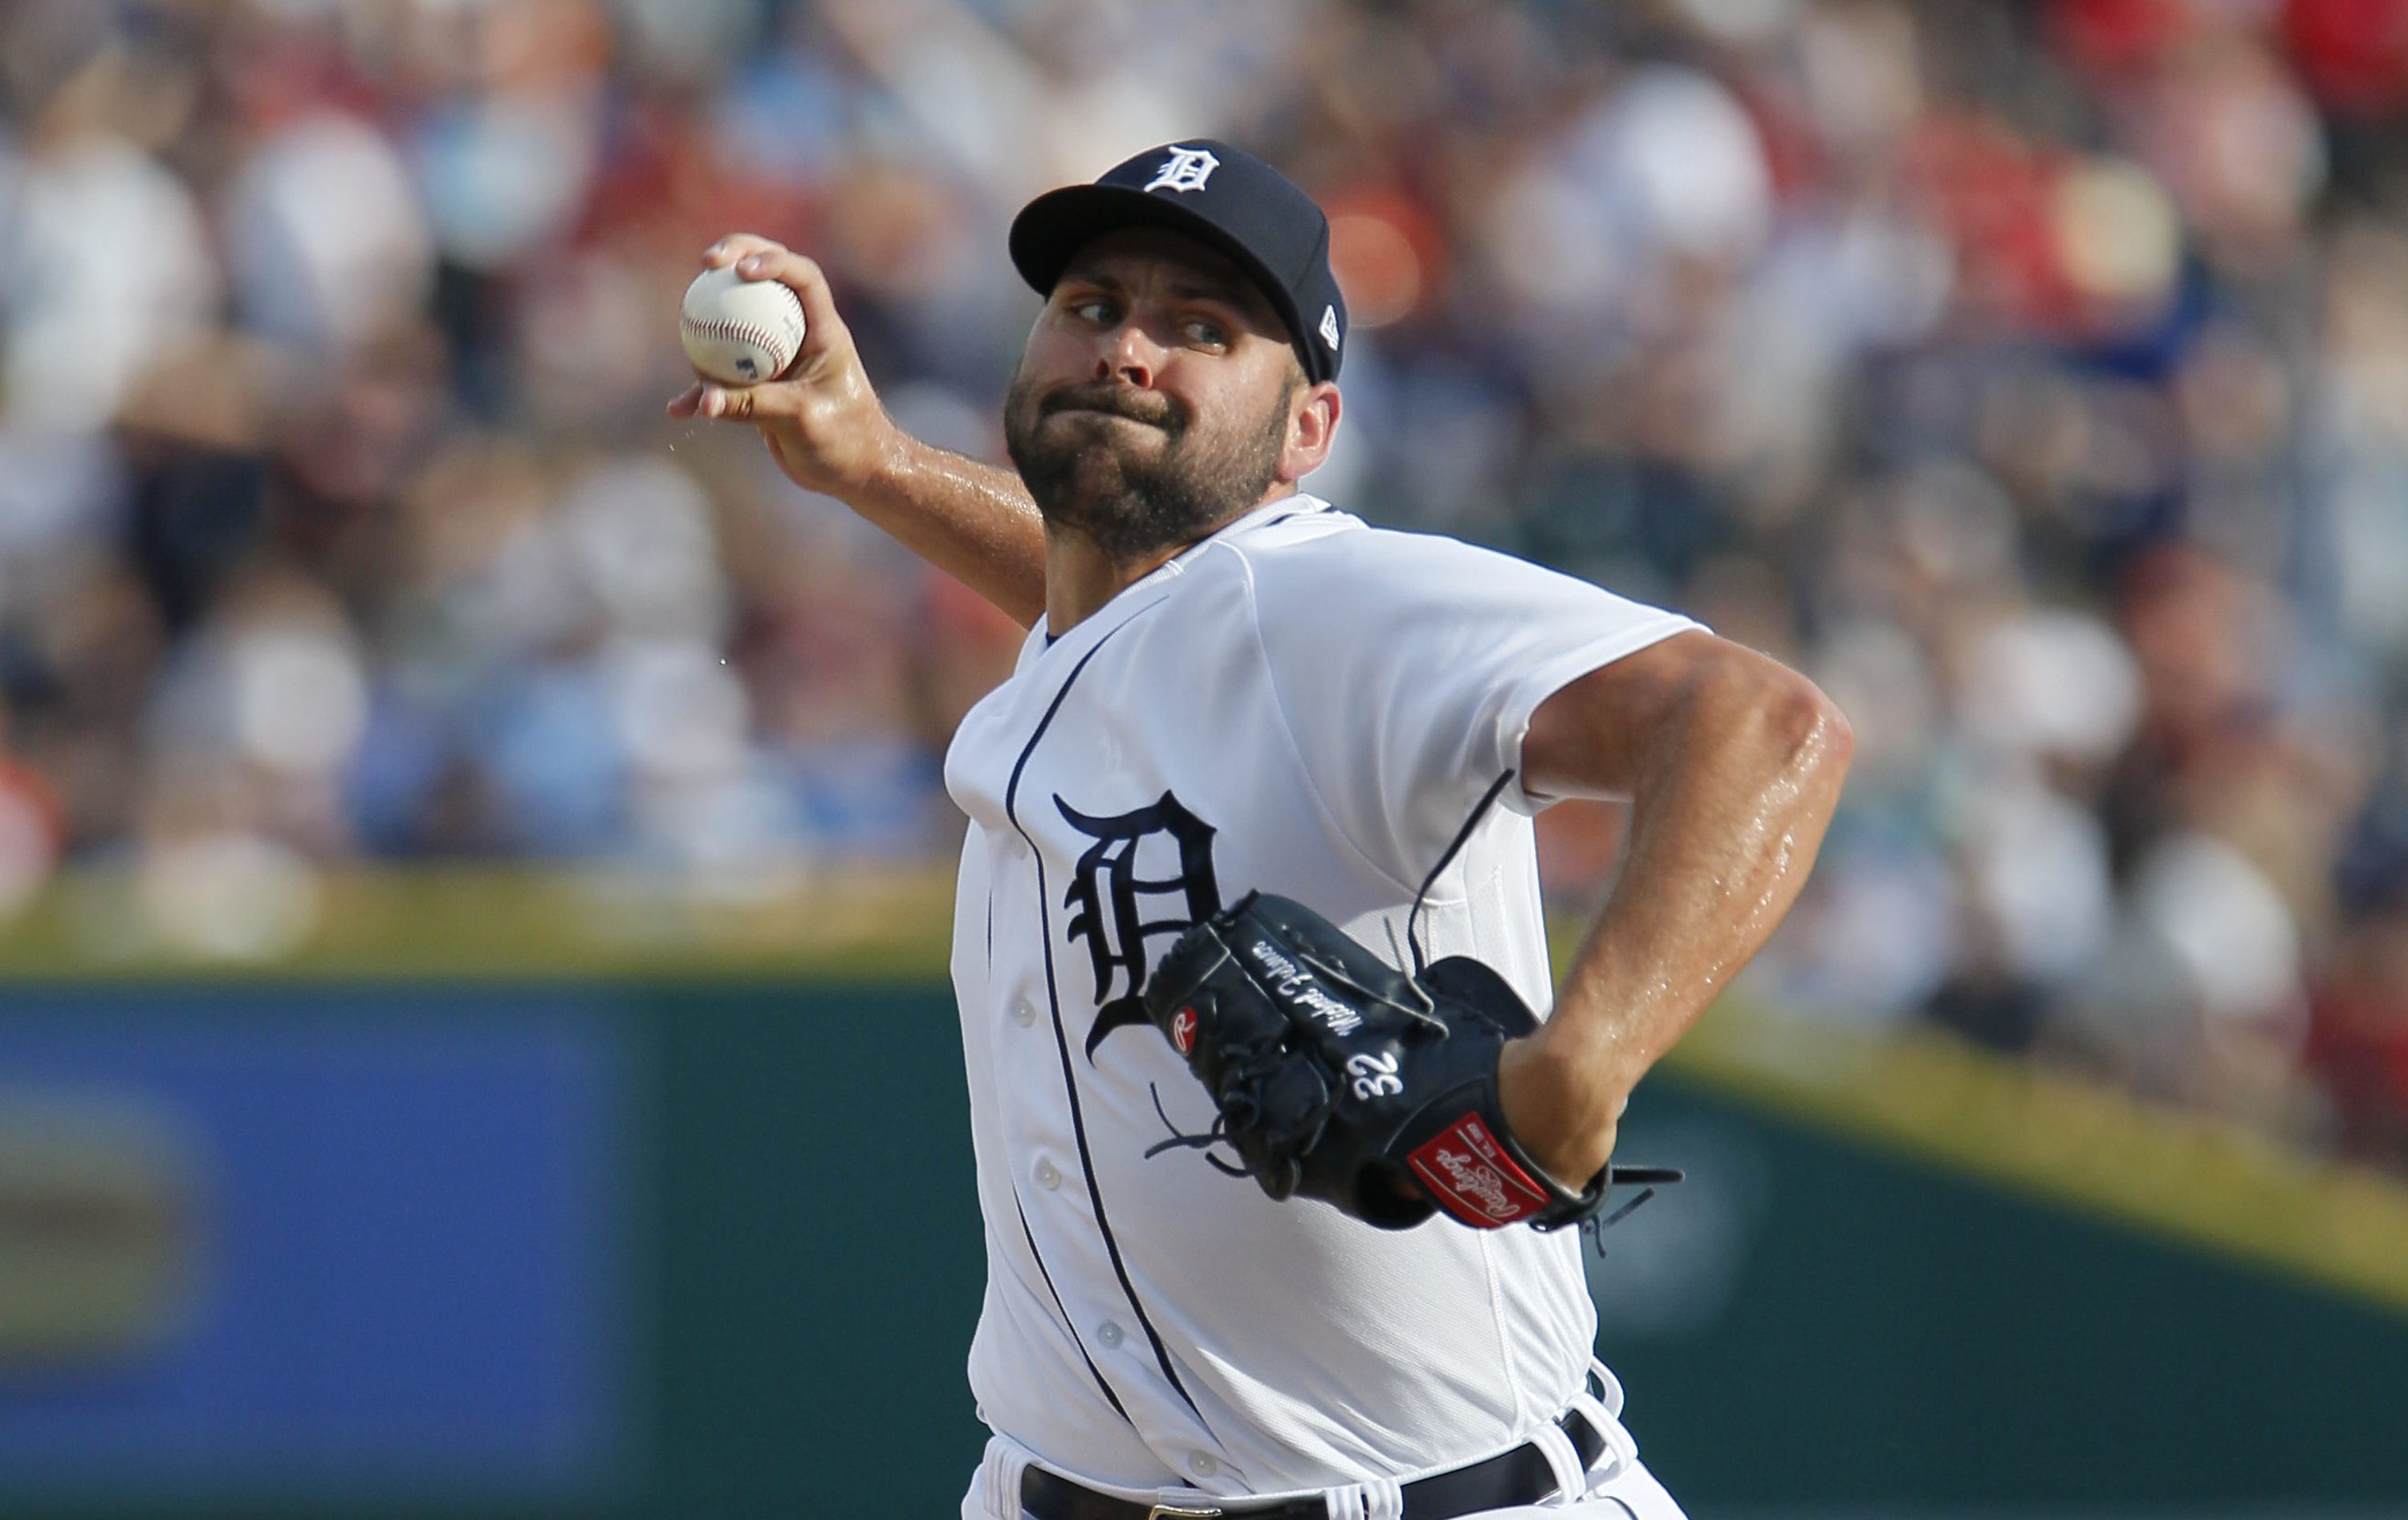 What's ahead for Tigers' bullpen? Trades could alter look for 2023